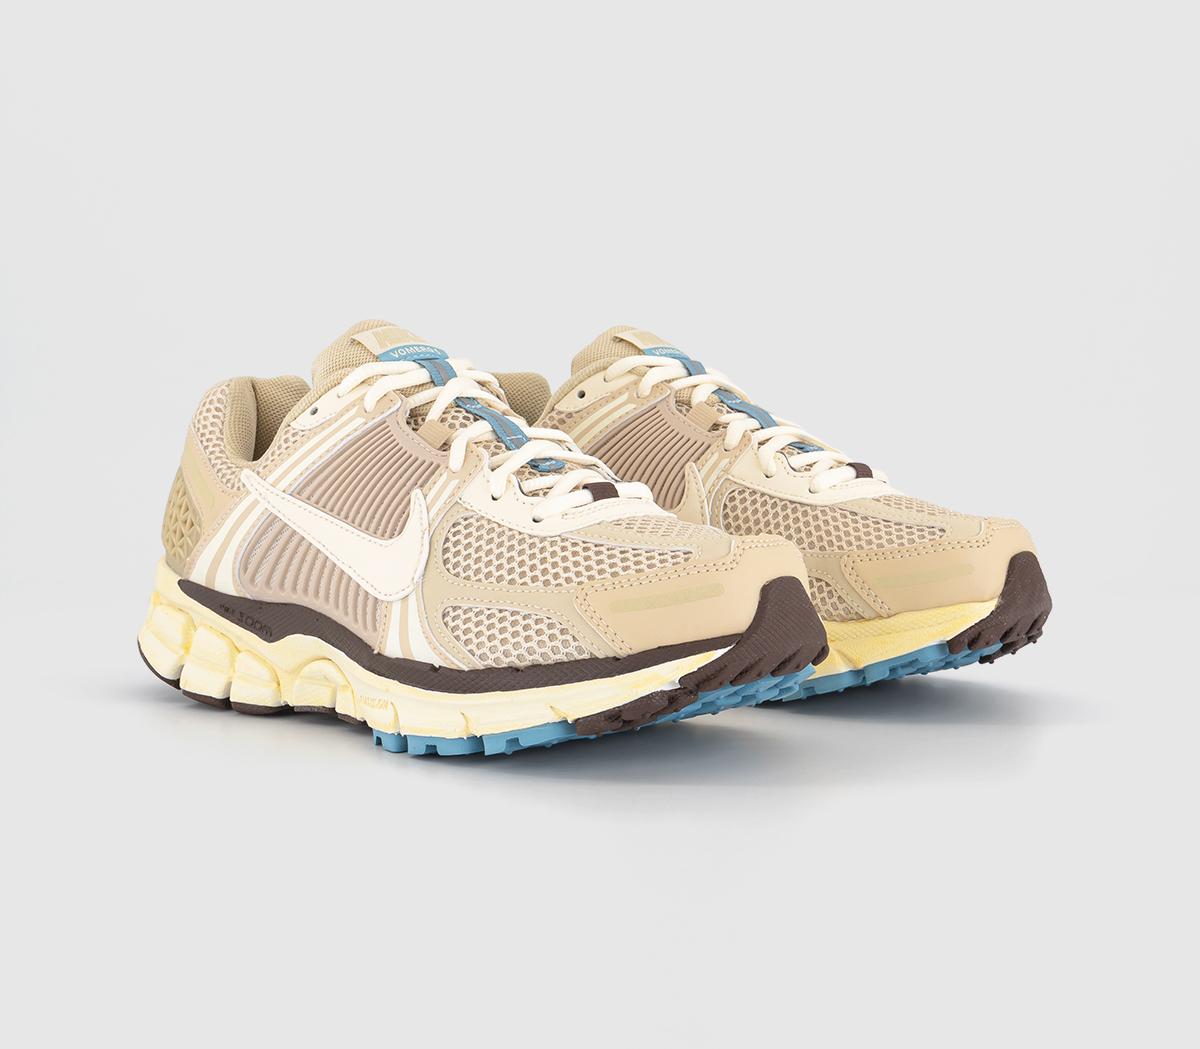 Nike Womens Zoom Vomero 5 Trainers Oatmeal Pale Ivory Sail Light Chocolate Worn Blue Natural, 8